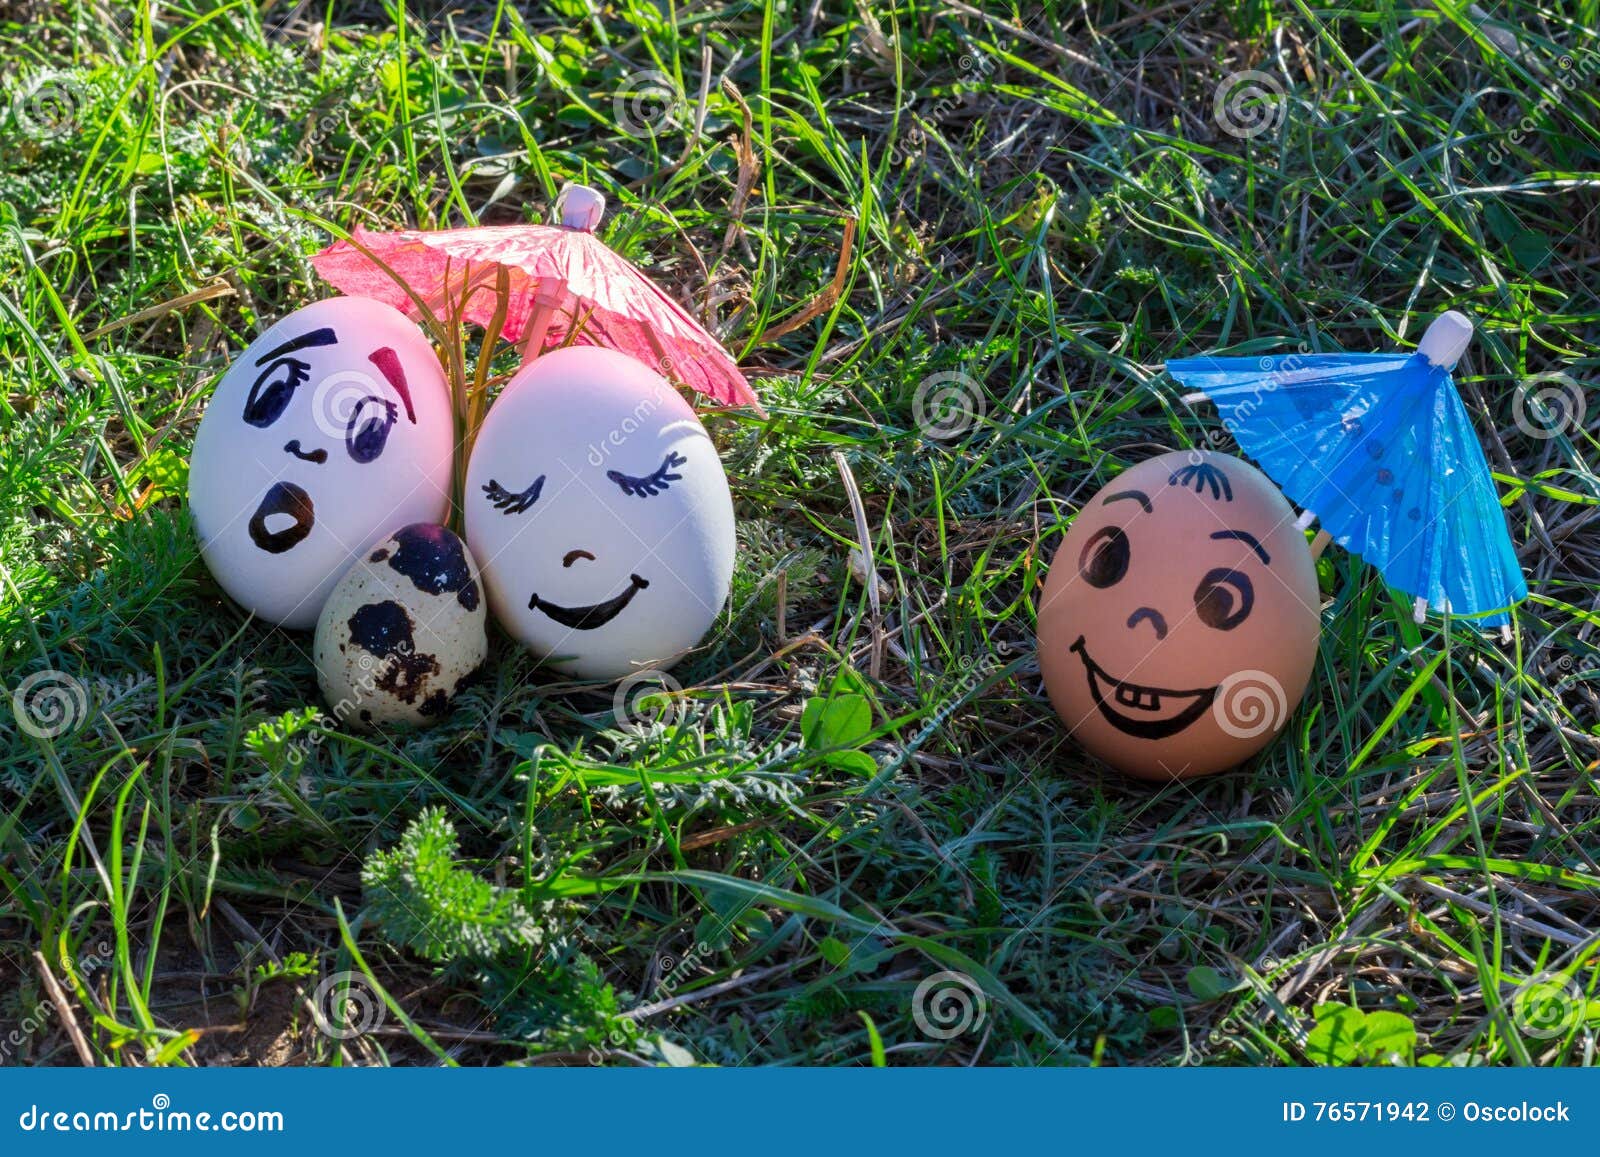 funny eggs imitating white couple, versicolored baby and coloure